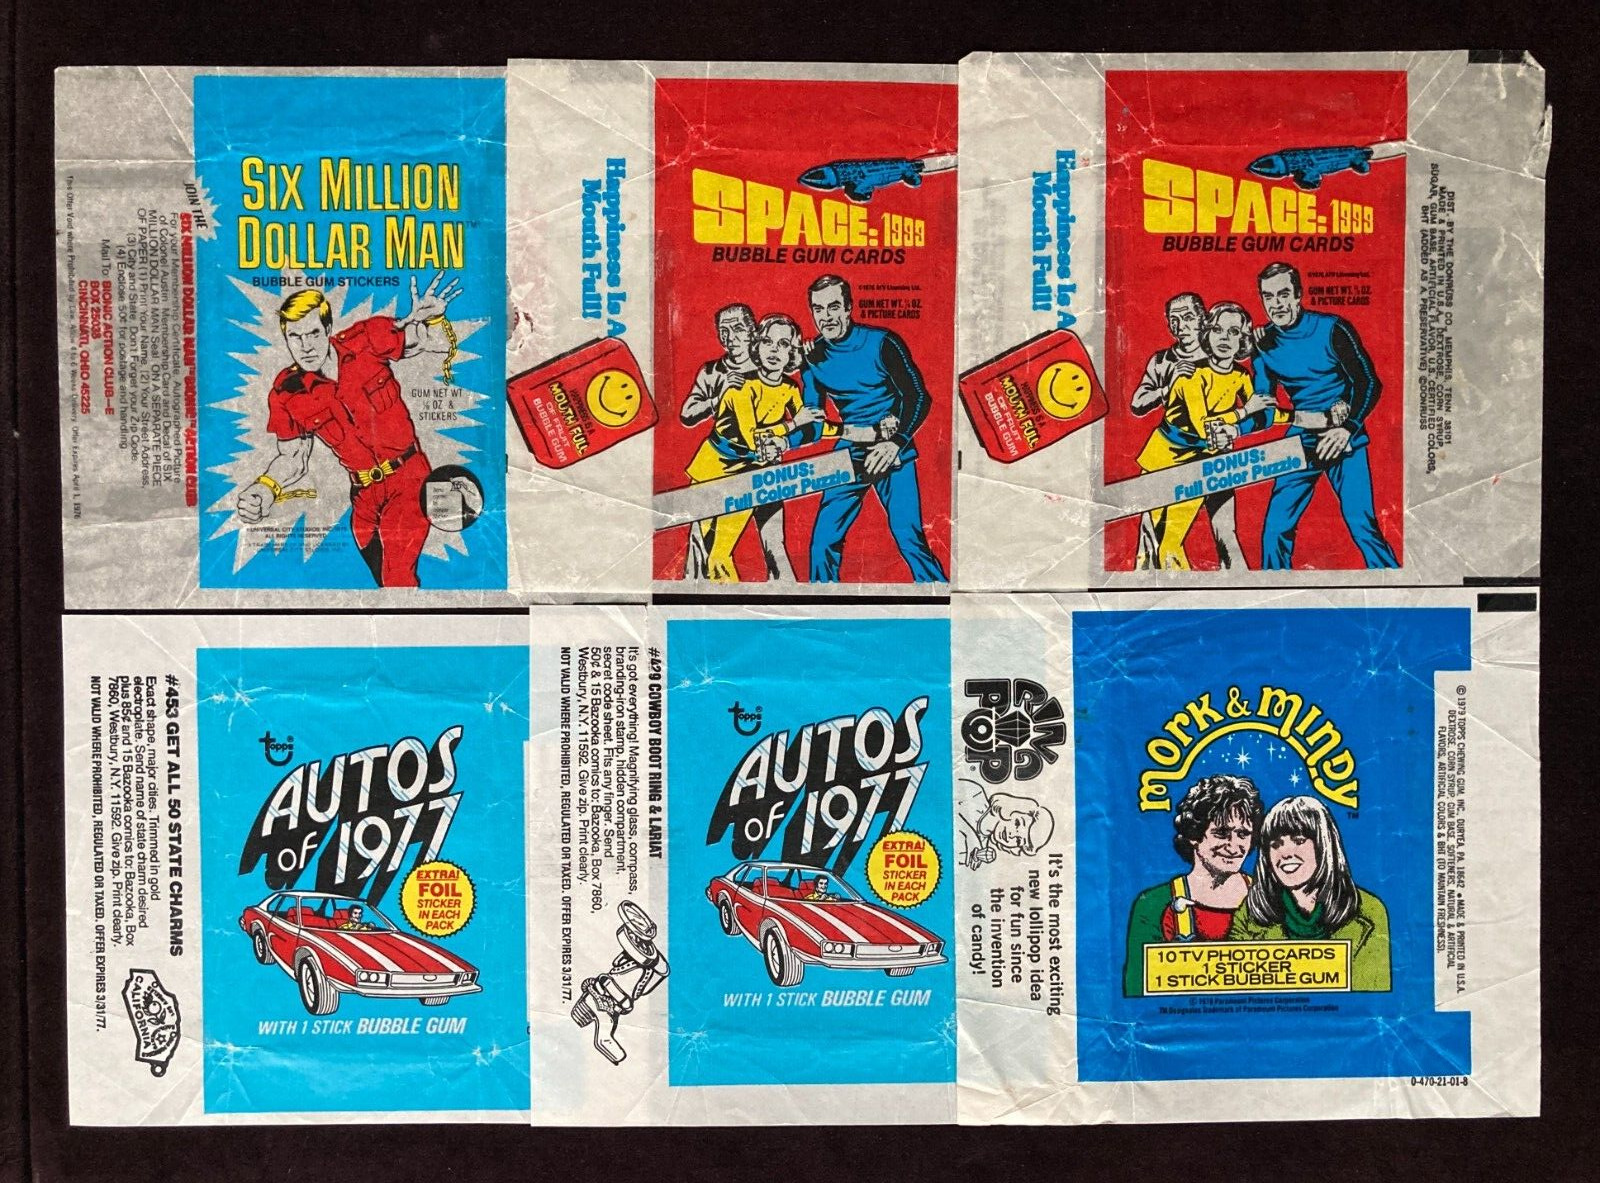 1970s Topps Donruss lot of 6 wrappers: Autos of 1977, Space 1999, Mork & Mindy